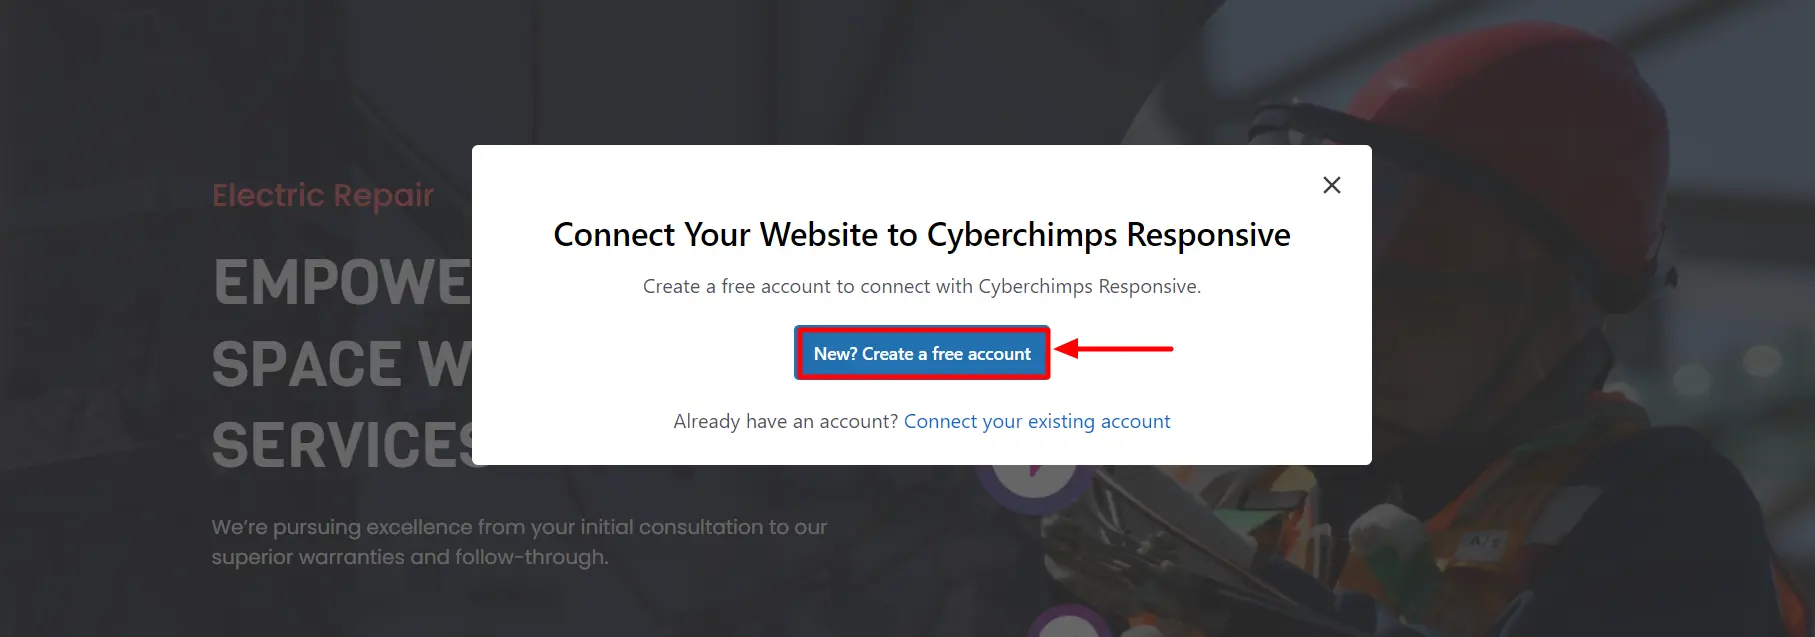 conecting website to cyberchimps